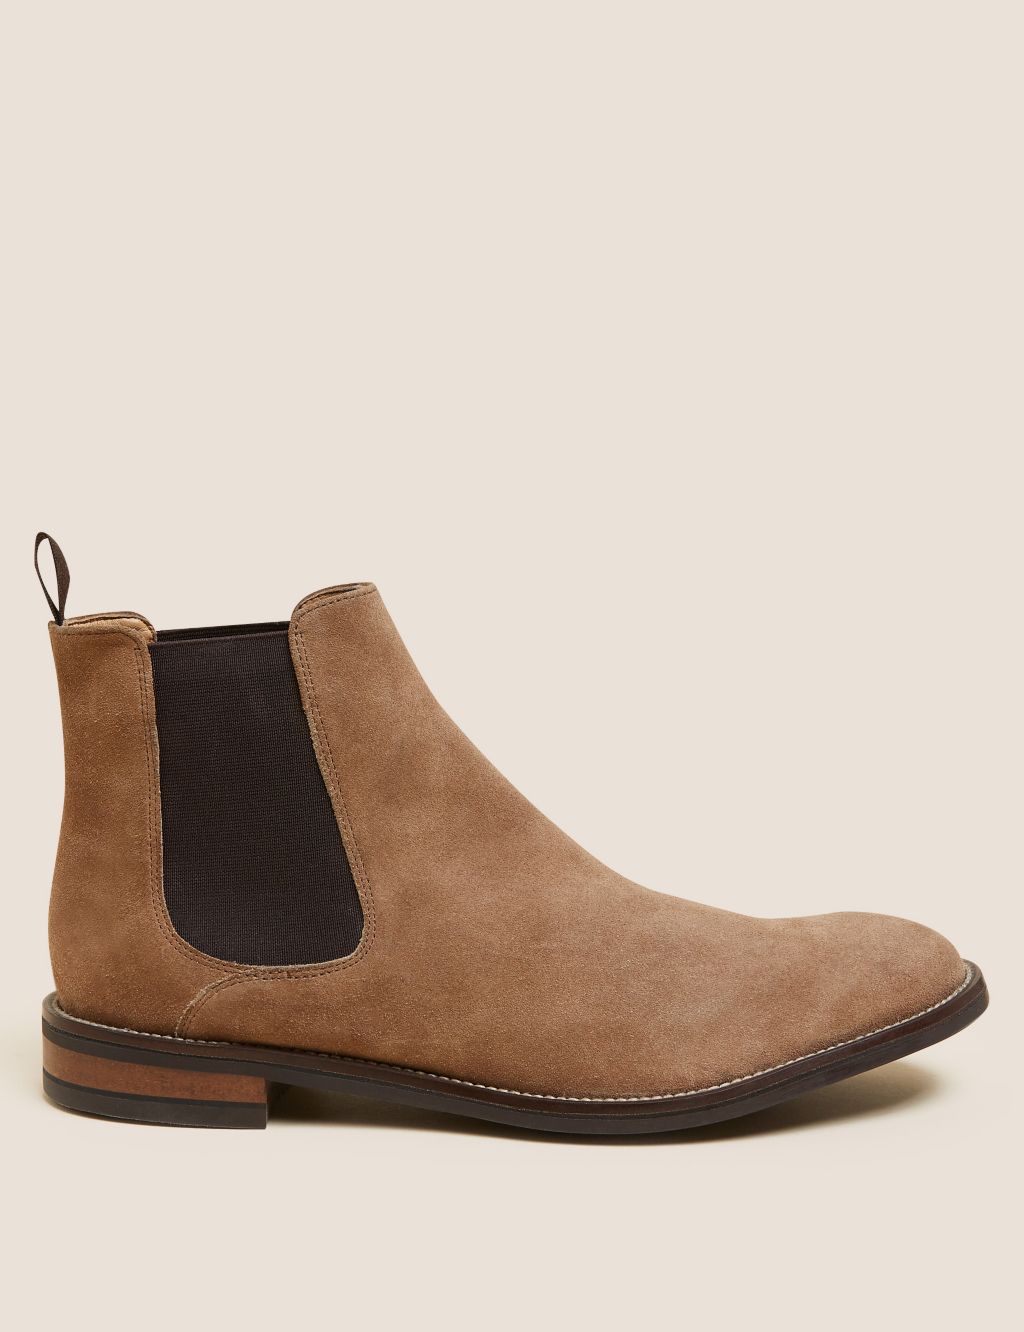 Suede Pull-On Chelsea Boots image 1